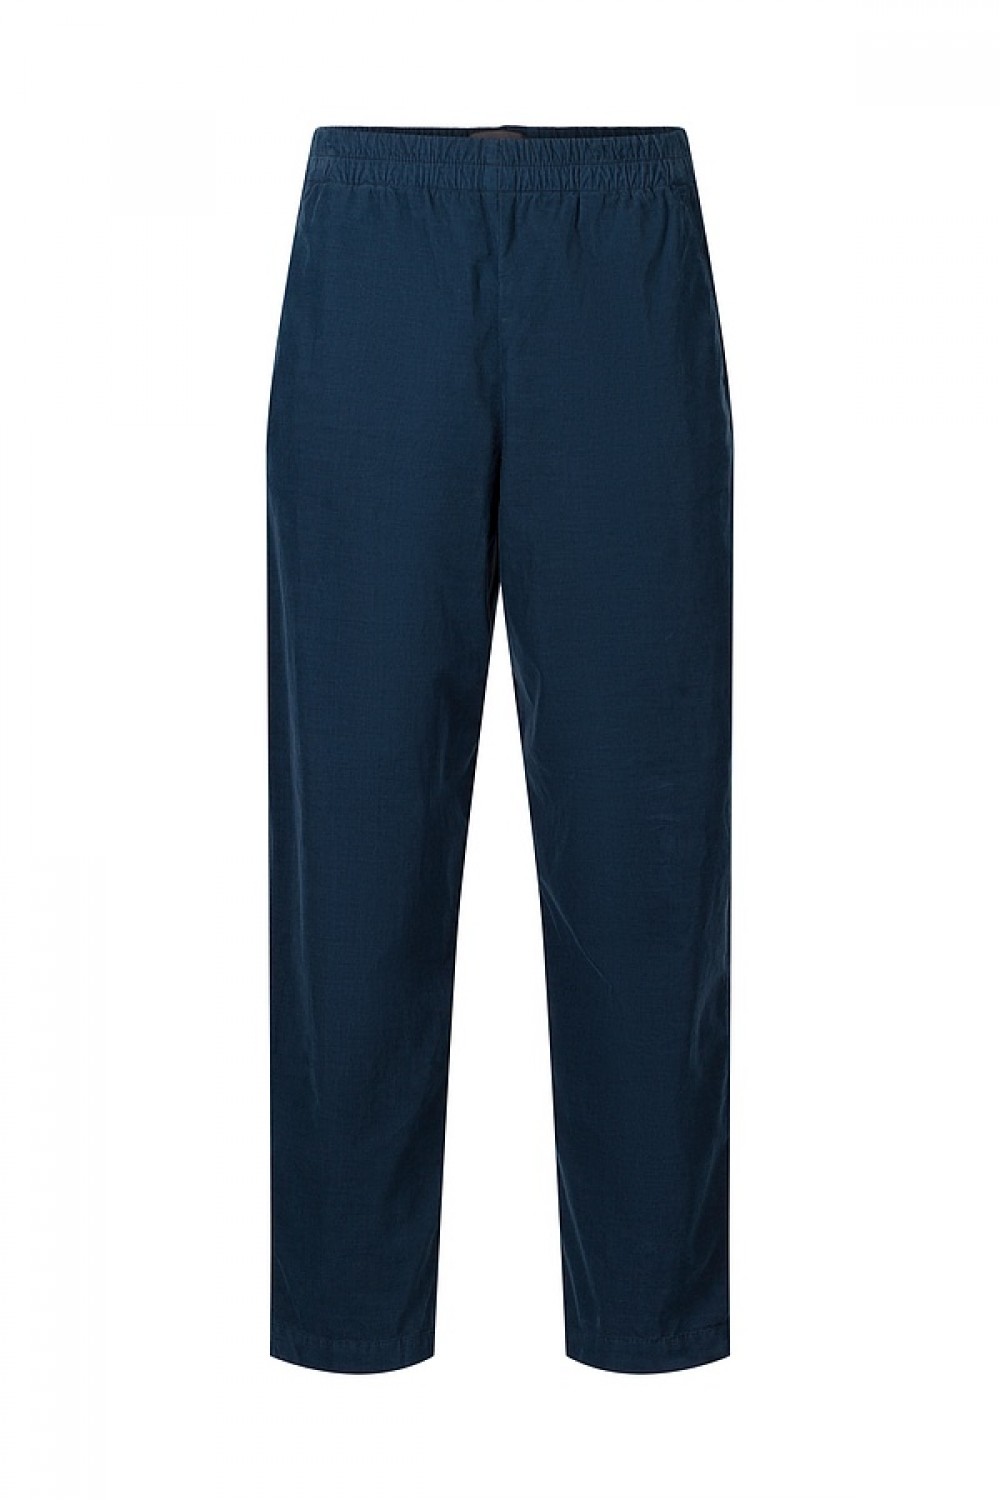 OSKA Trousers Minnima 310 Blue / Cotton cord with stretch content